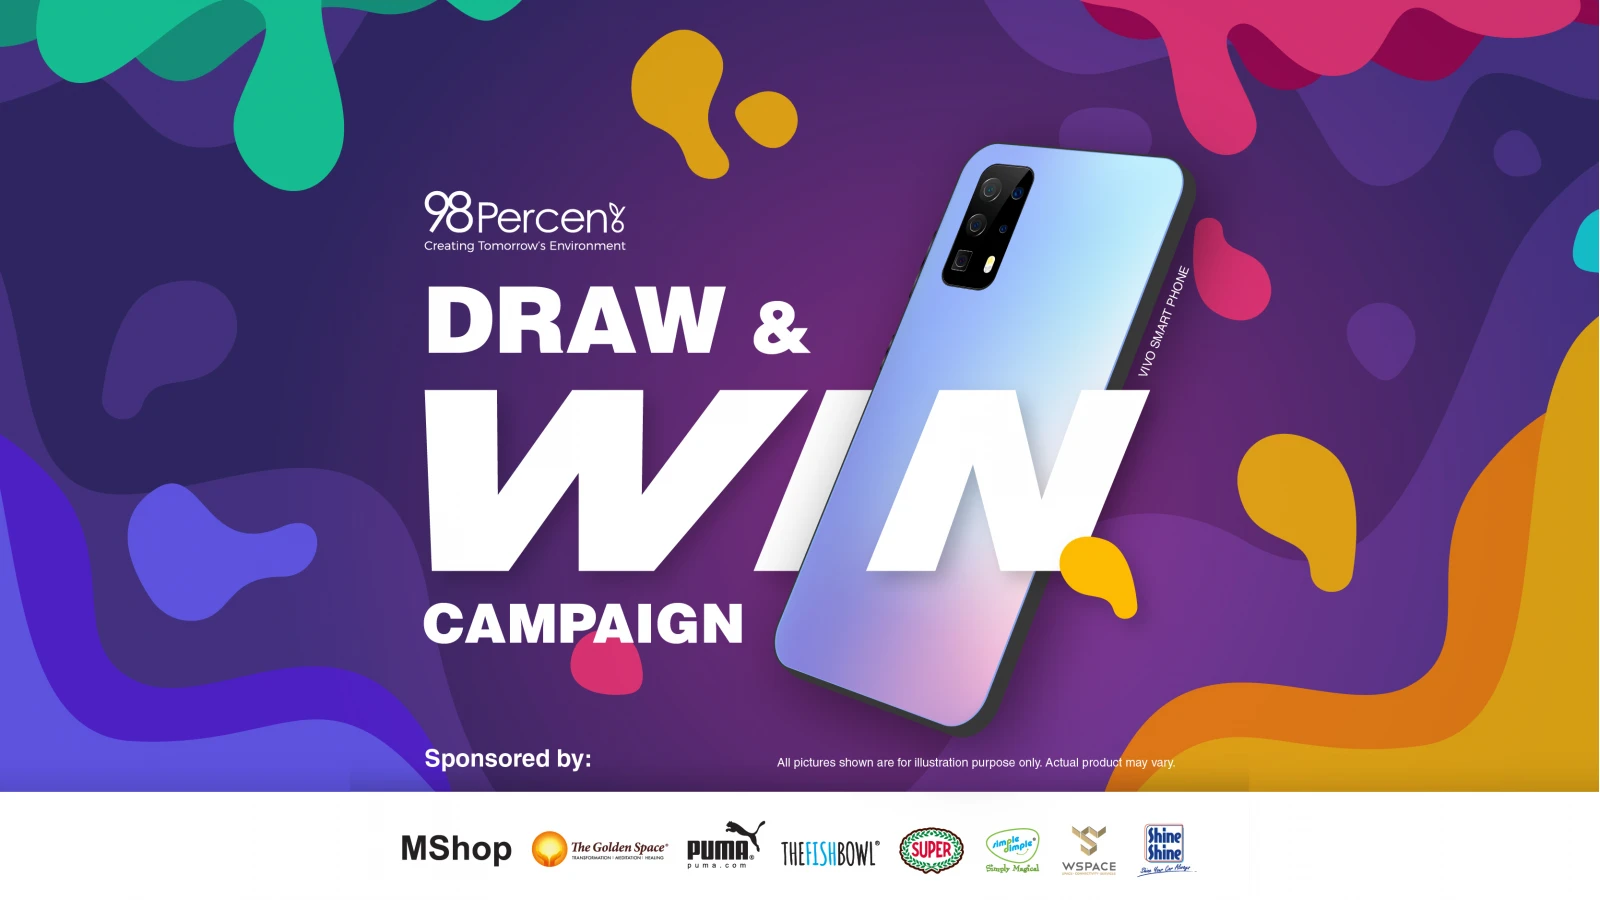 98 Percent Brand Month coming to town with 98 Percent Draw & Win Campaign!